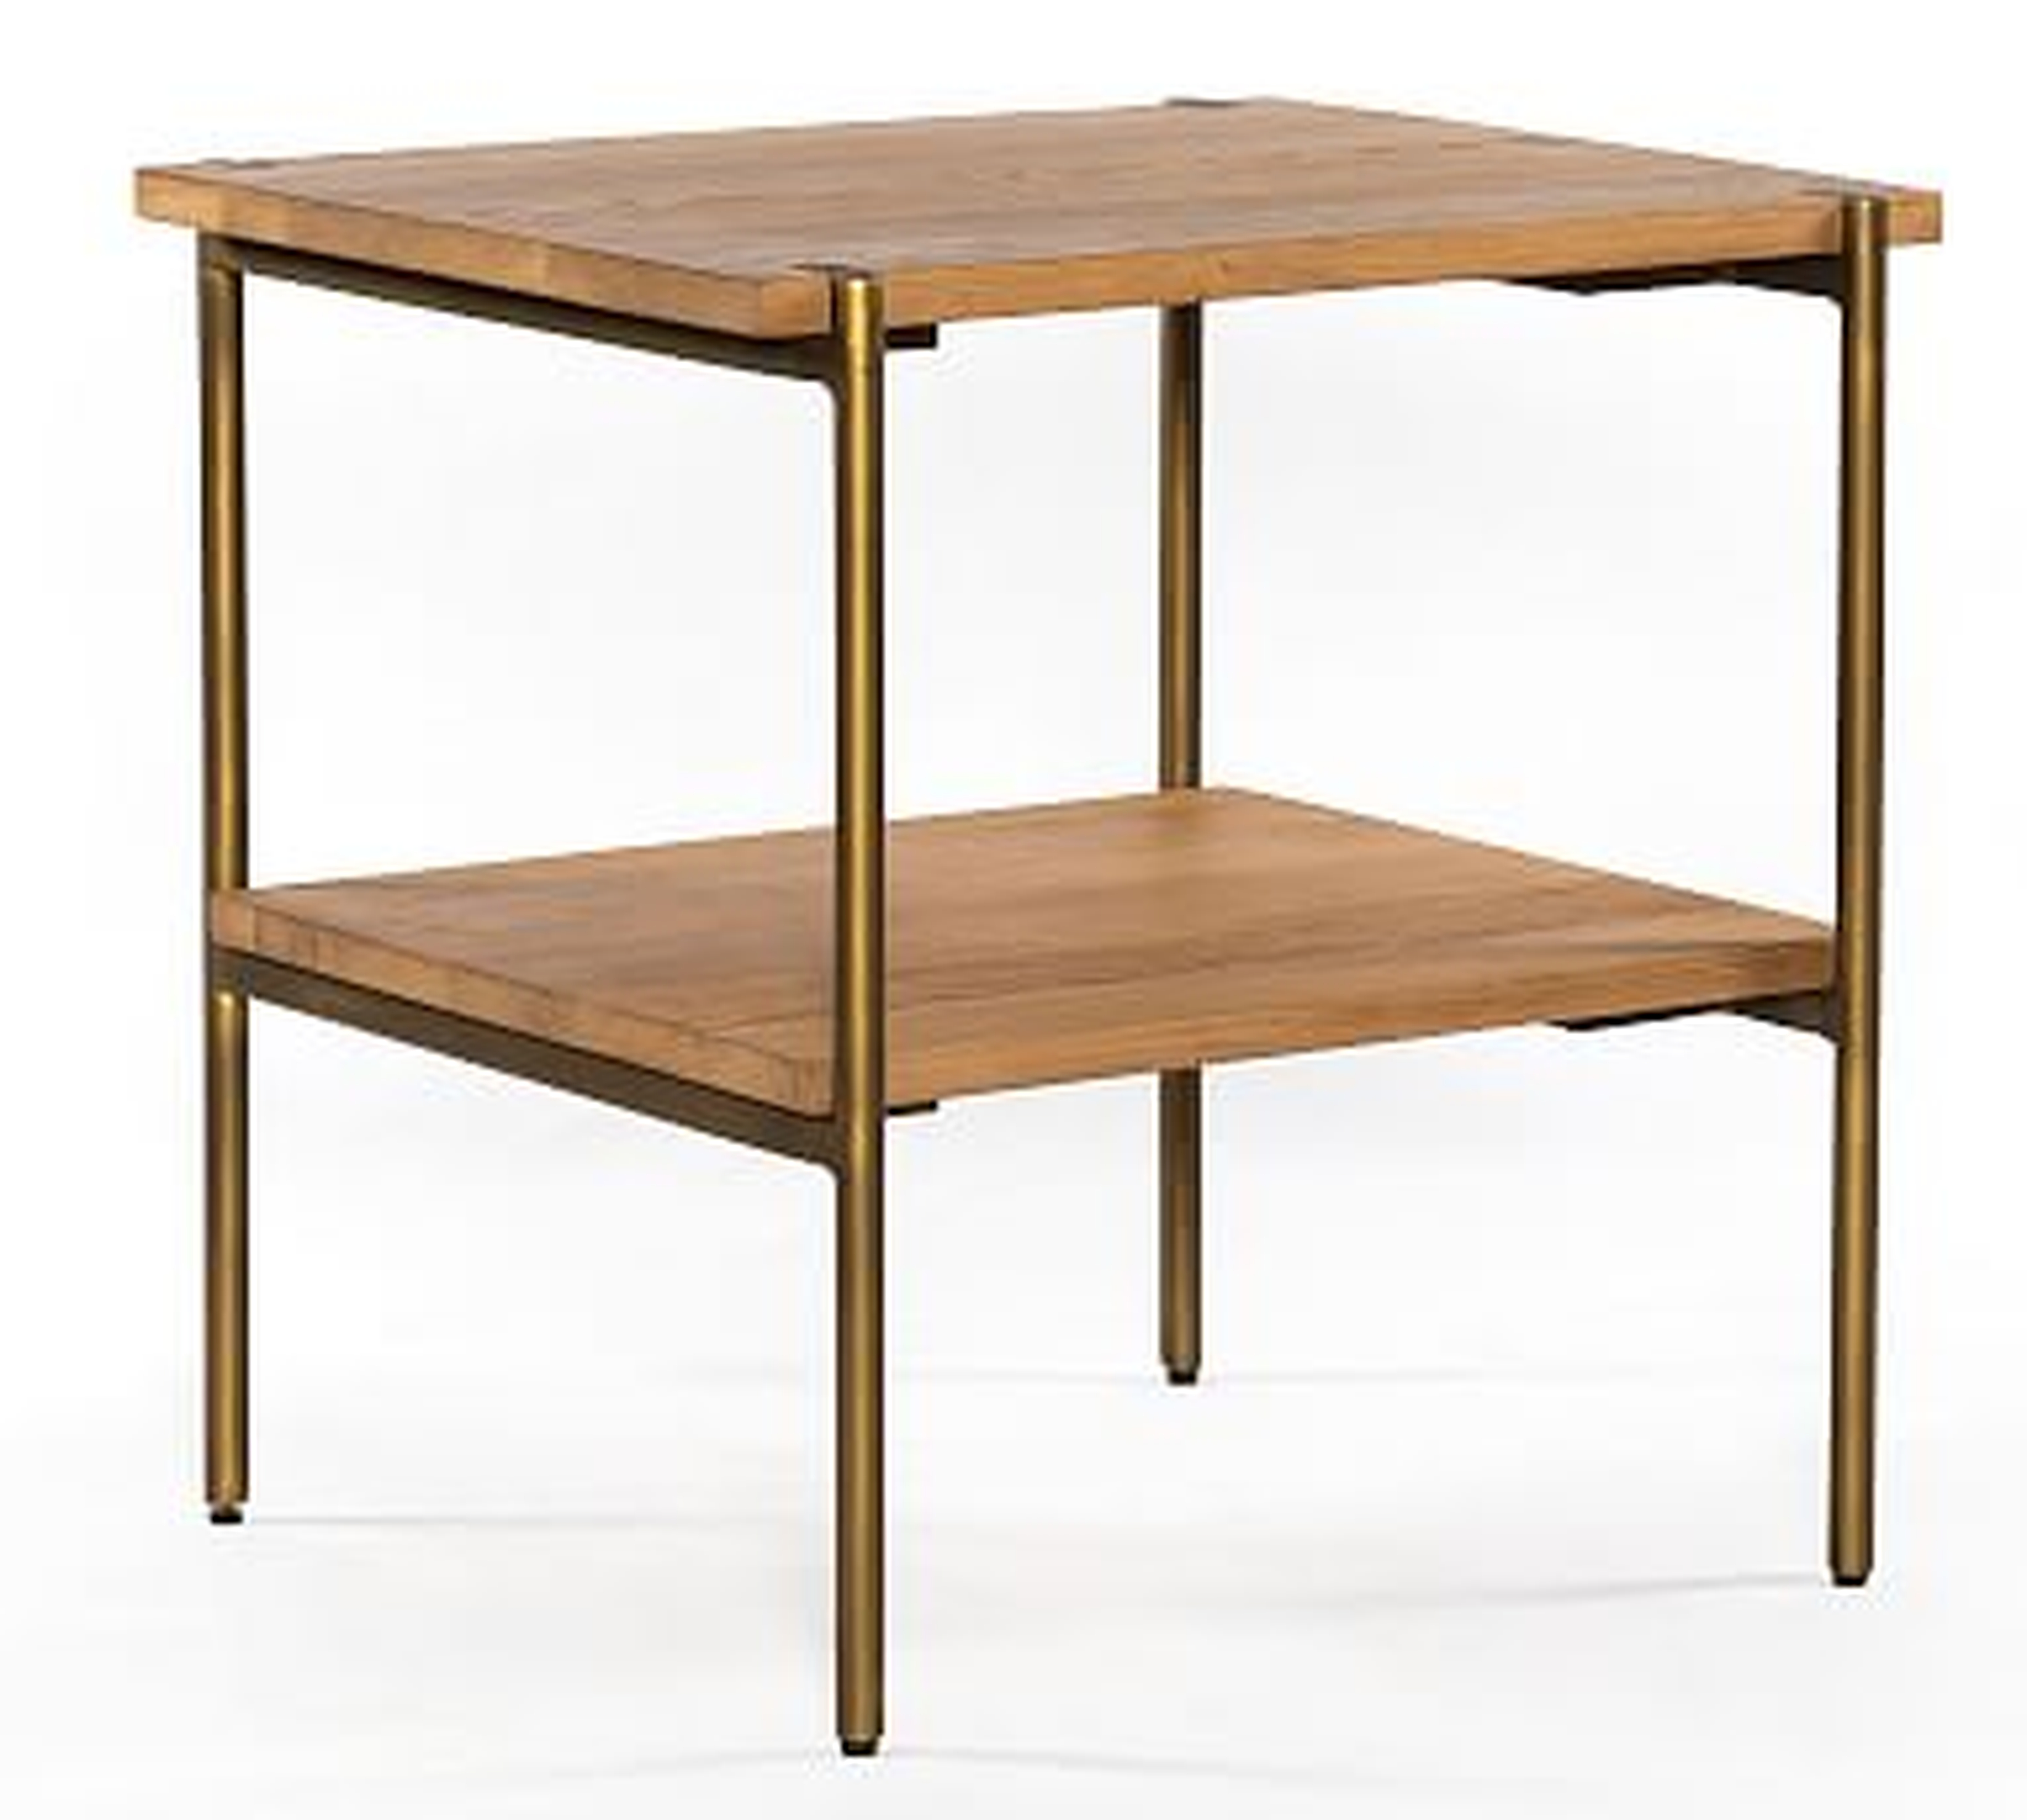 Archdale Rectangular Side Table, Satin Brass & Natural Oak - Pottery Barn